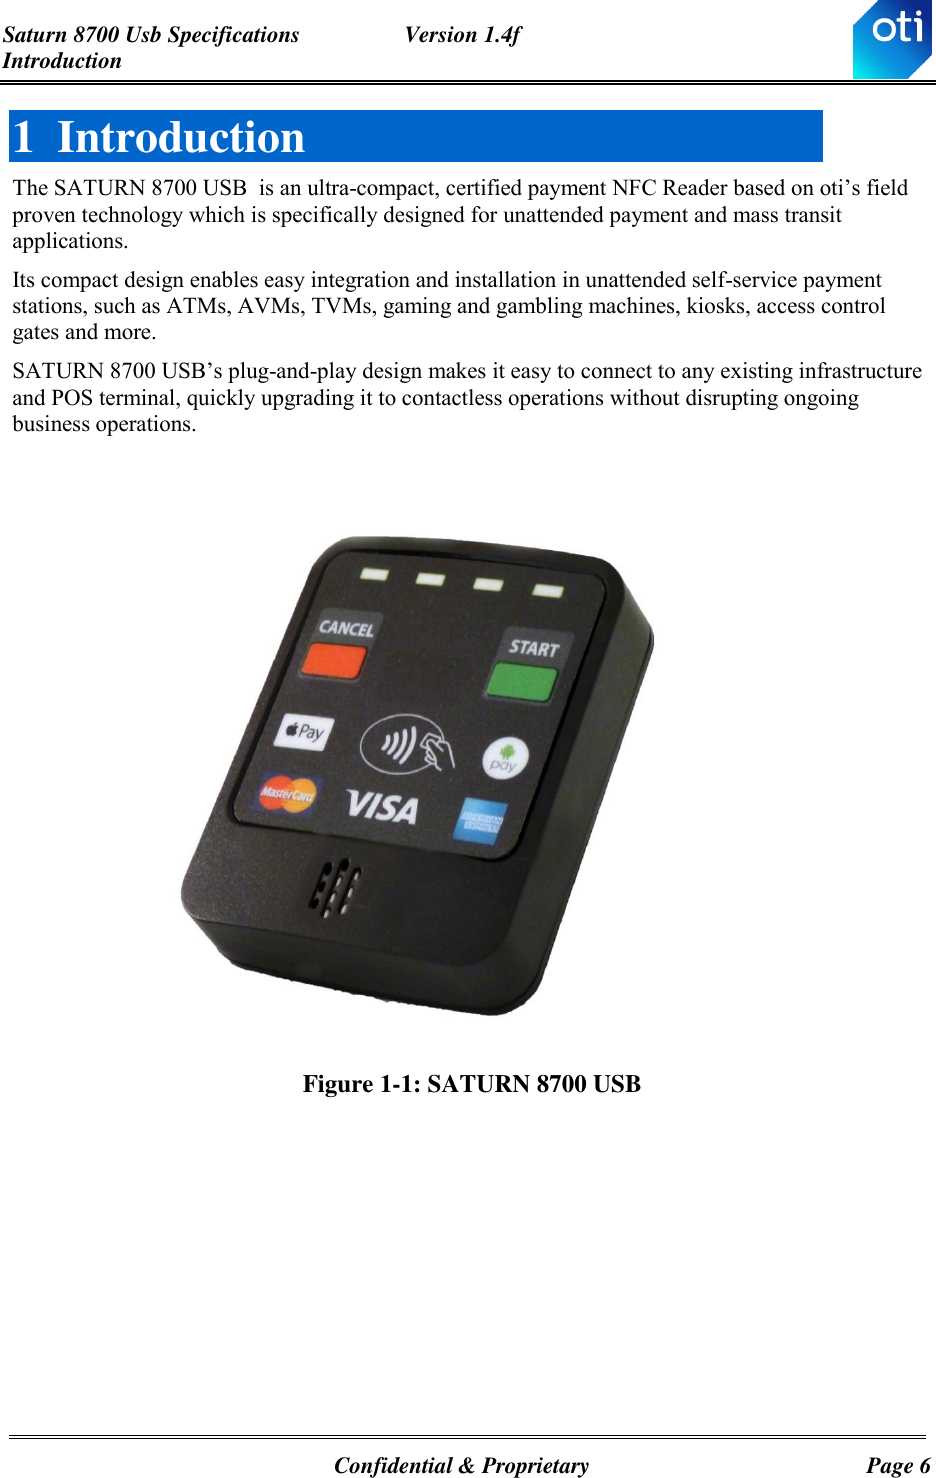 Saturn 8700 Usb Specifications  Version 1.4f Introduction   Confidential &amp; Proprietary  Page 6 1 Introduction The SATURN 8700 USB  is an ultra-compact, certified payment NFC Reader based on oti’s field proven technology which is specifically designed for unattended payment and mass transit applications.  Its compact design enables easy integration and installation in unattended self-service payment stations, such as ATMs, AVMs, TVMs, gaming and gambling machines, kiosks, access control gates and more. SATURN 8700 USB’s plug-and-play design makes it easy to connect to any existing infrastructure and POS terminal, quickly upgrading it to contactless operations without disrupting ongoing business operations.     Figure 1-1: SATURN 8700 USB    